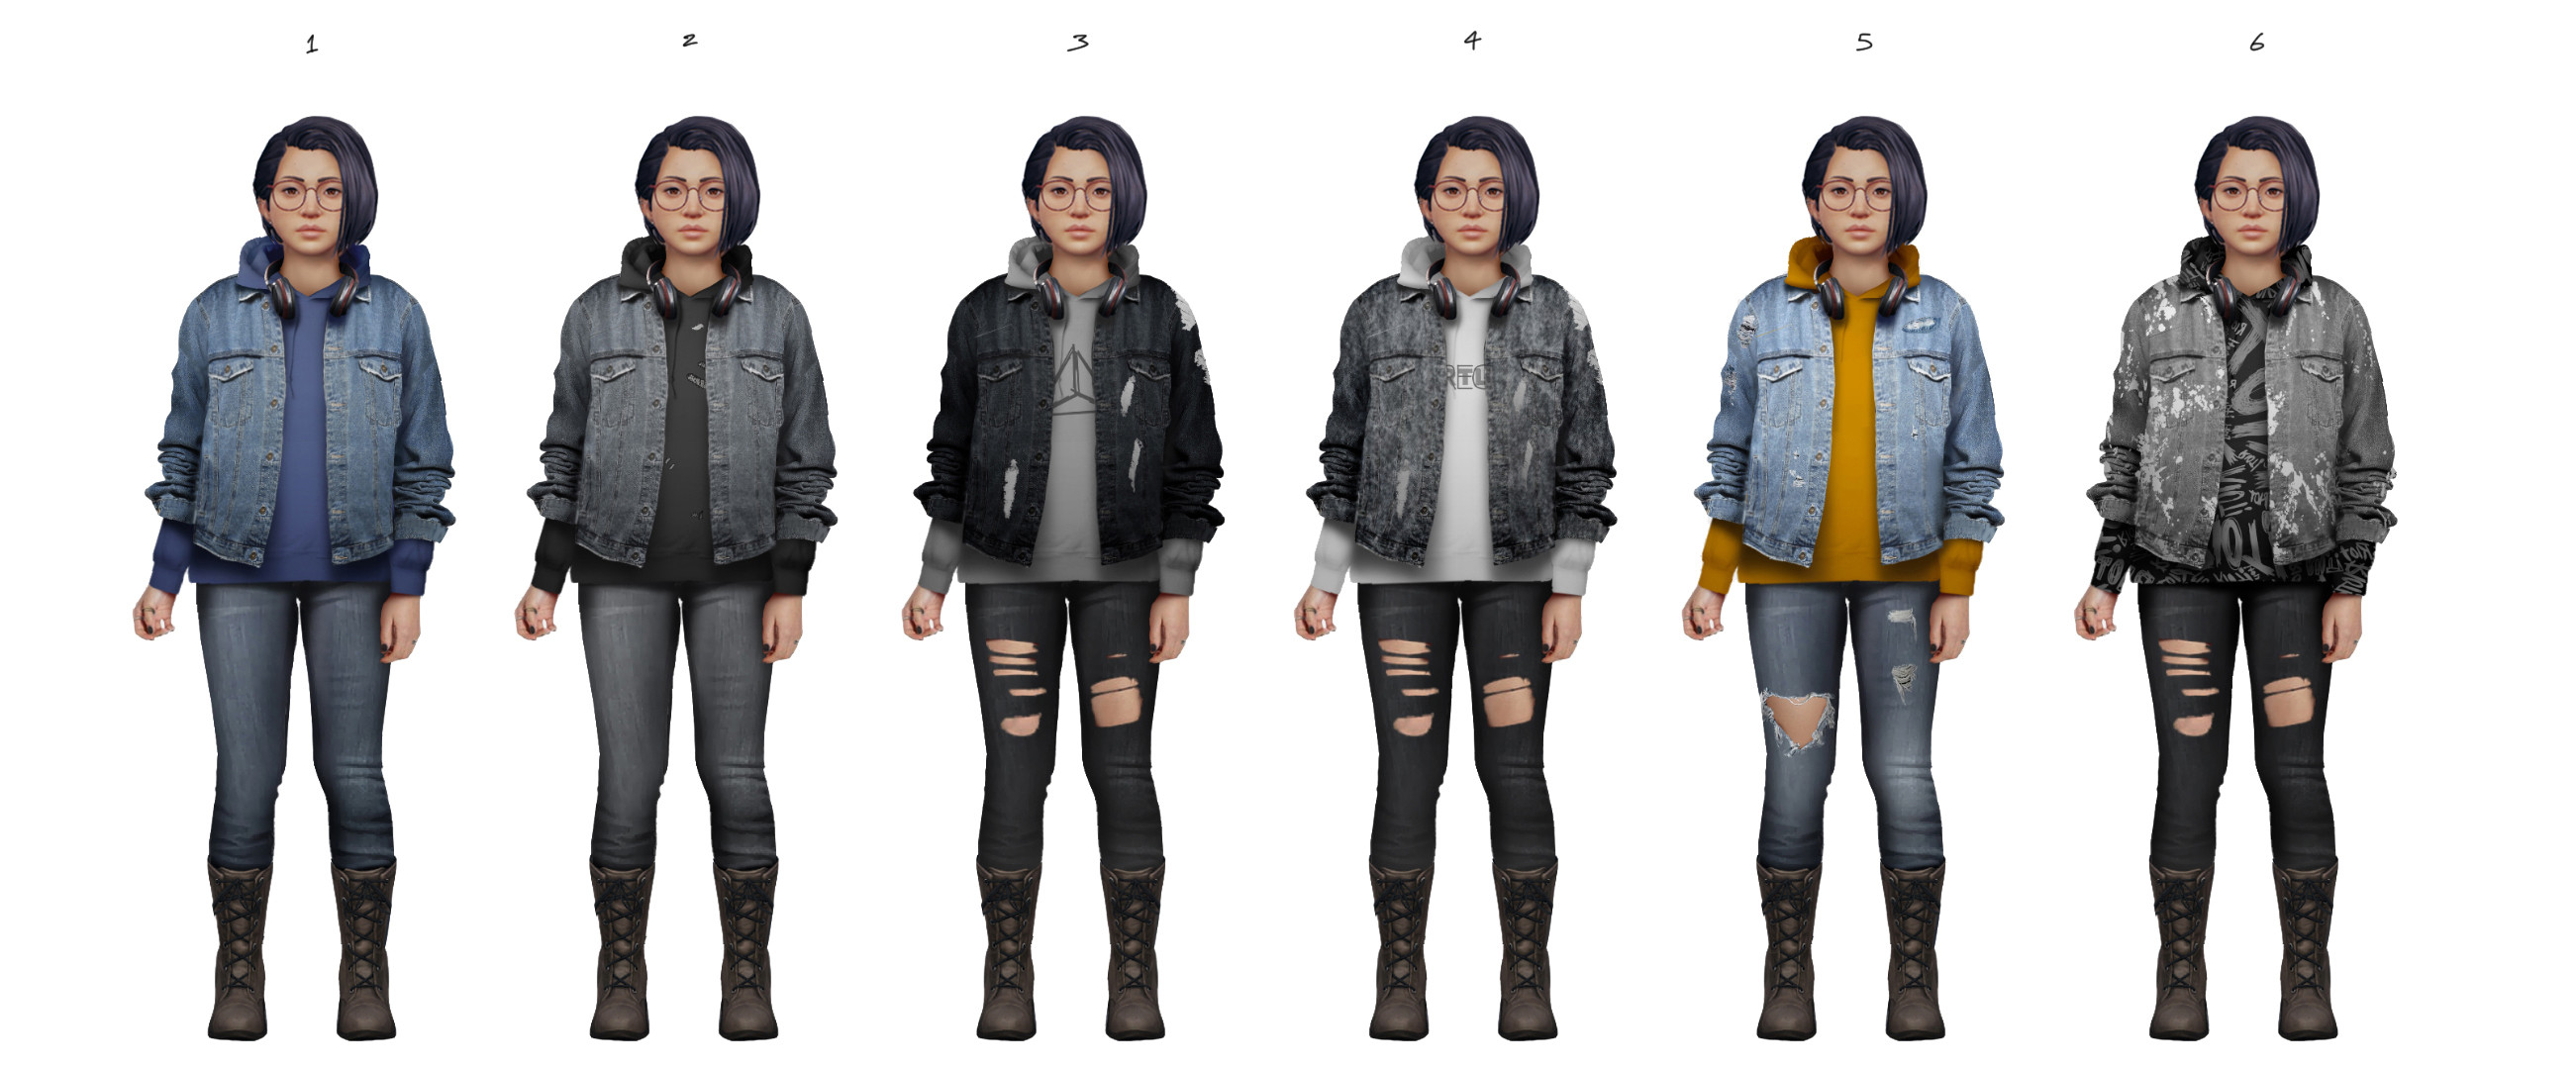 Chapter 6 - Casual Outfit Options